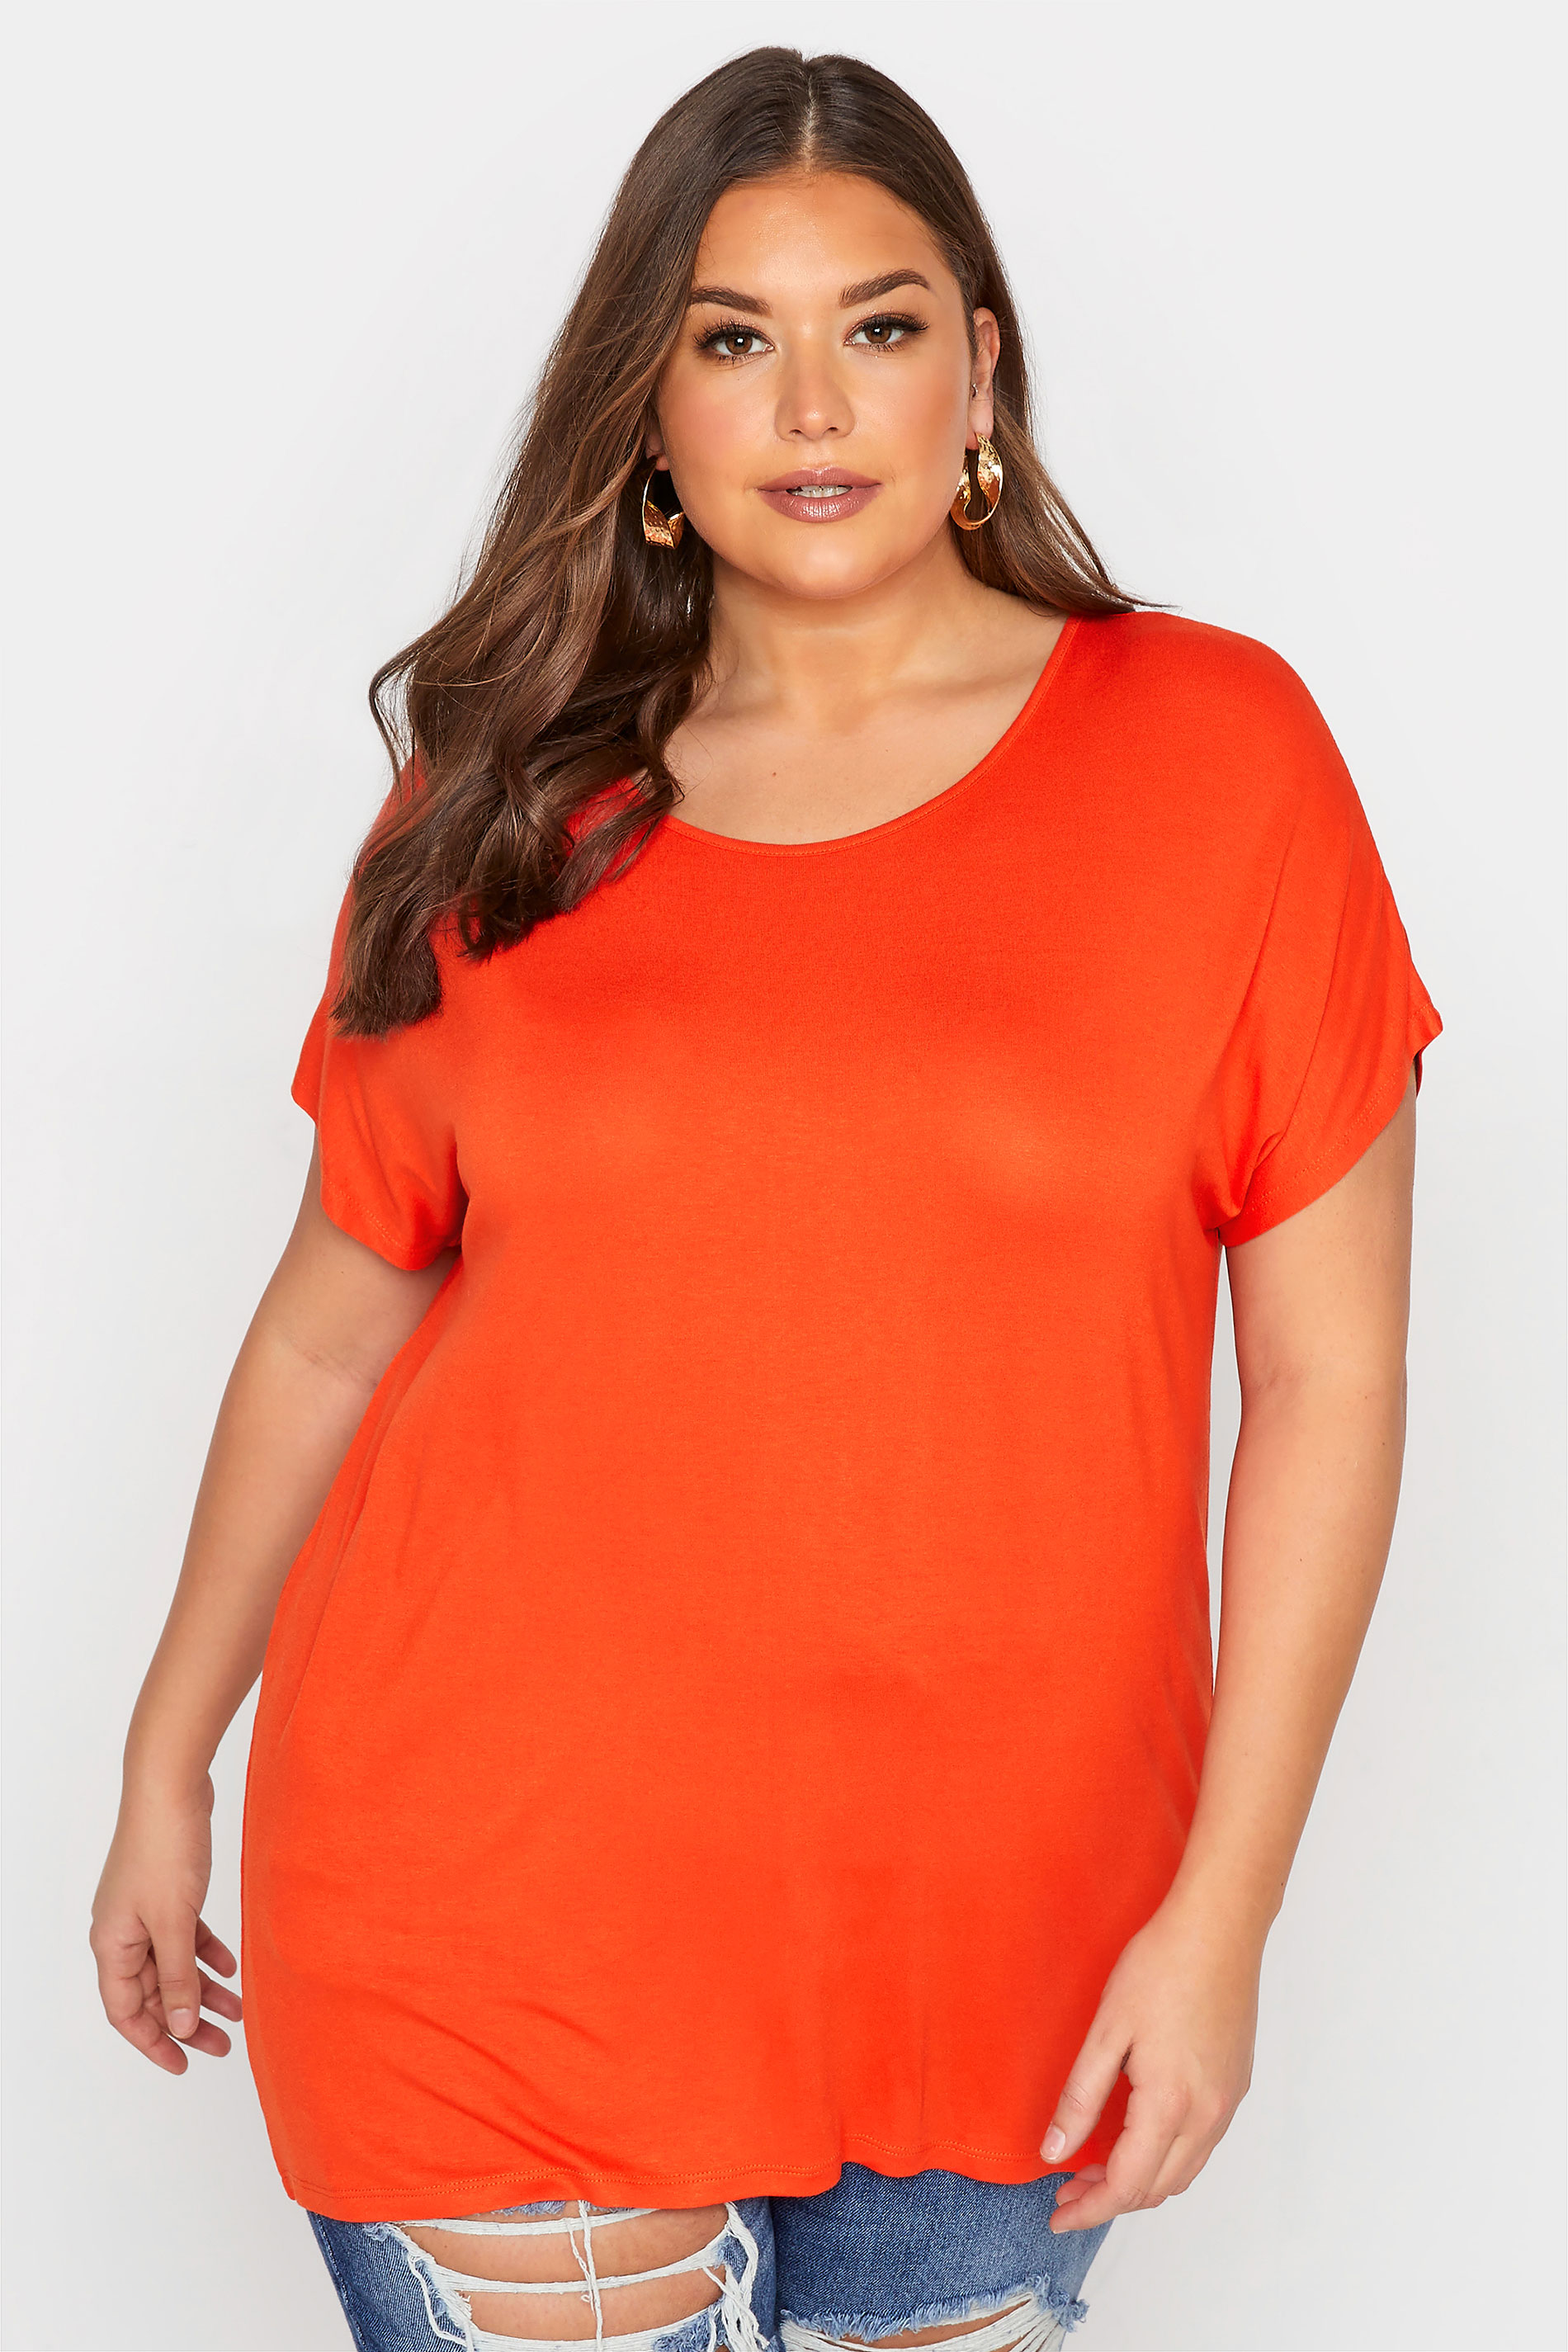 Grande taille  Tops Grande taille  T-Shirts | T-Shirt Orange Flashy Manches Courtes Jersey - TV19335